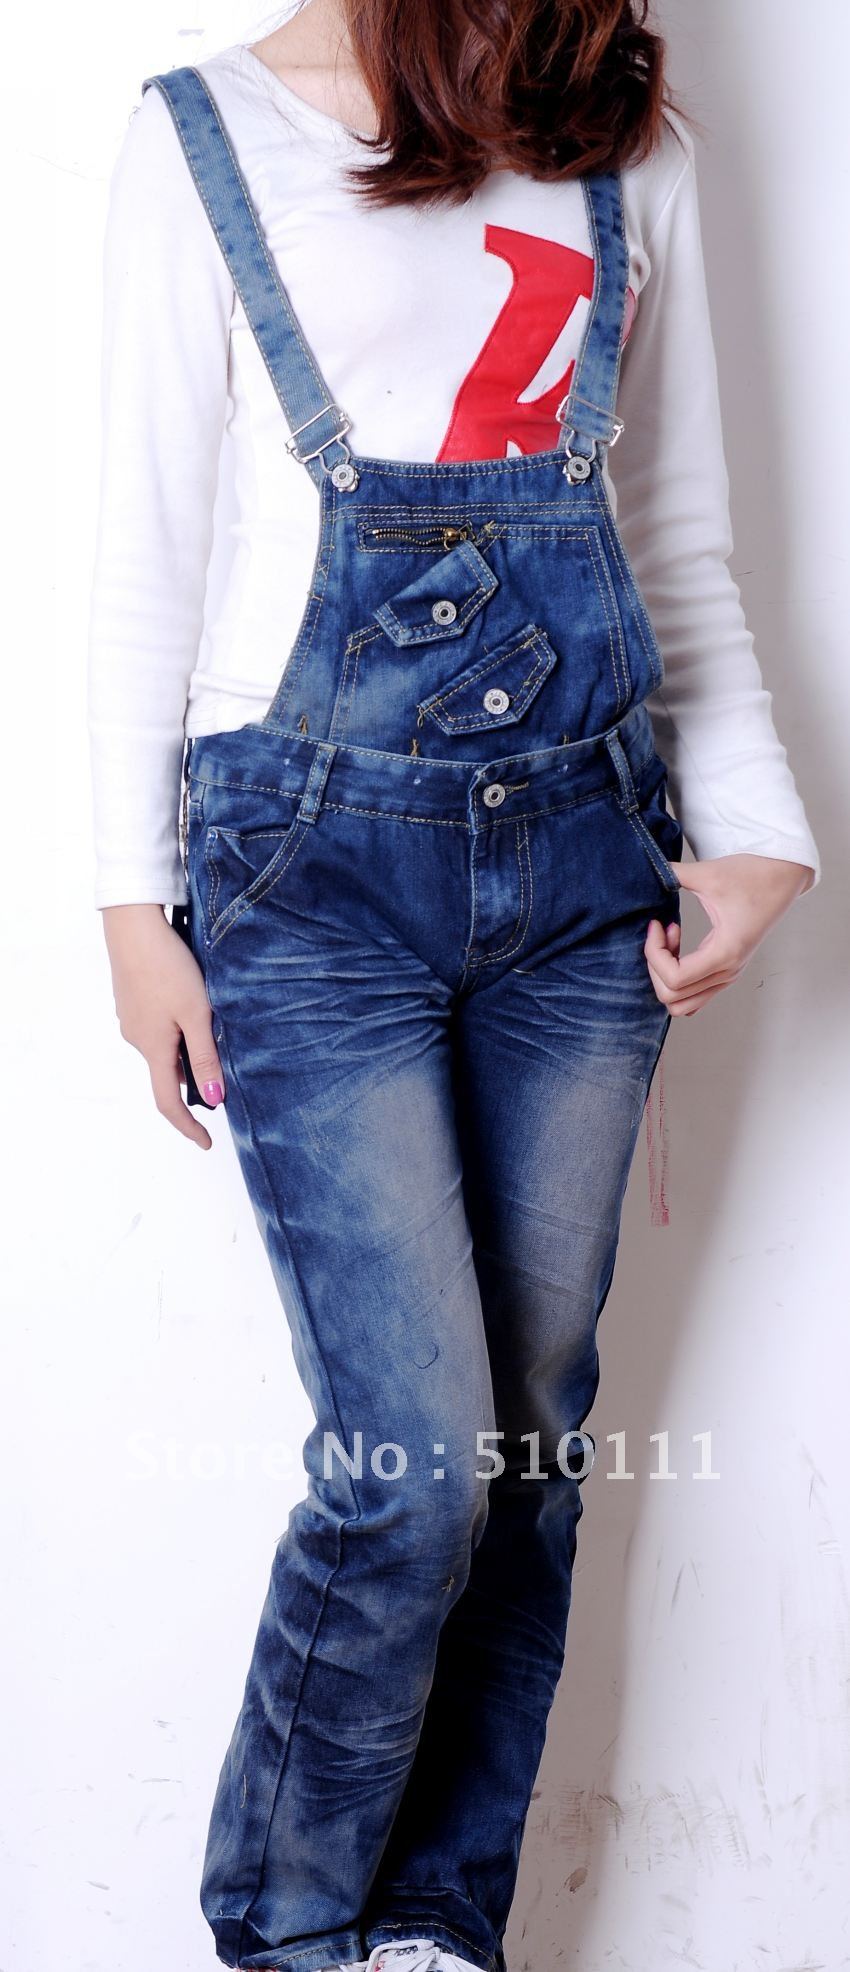 Free Shipping new design women's jeans brand jeans, overalls,Lady's Long Jeans,Denim Trousers,Blue #9008